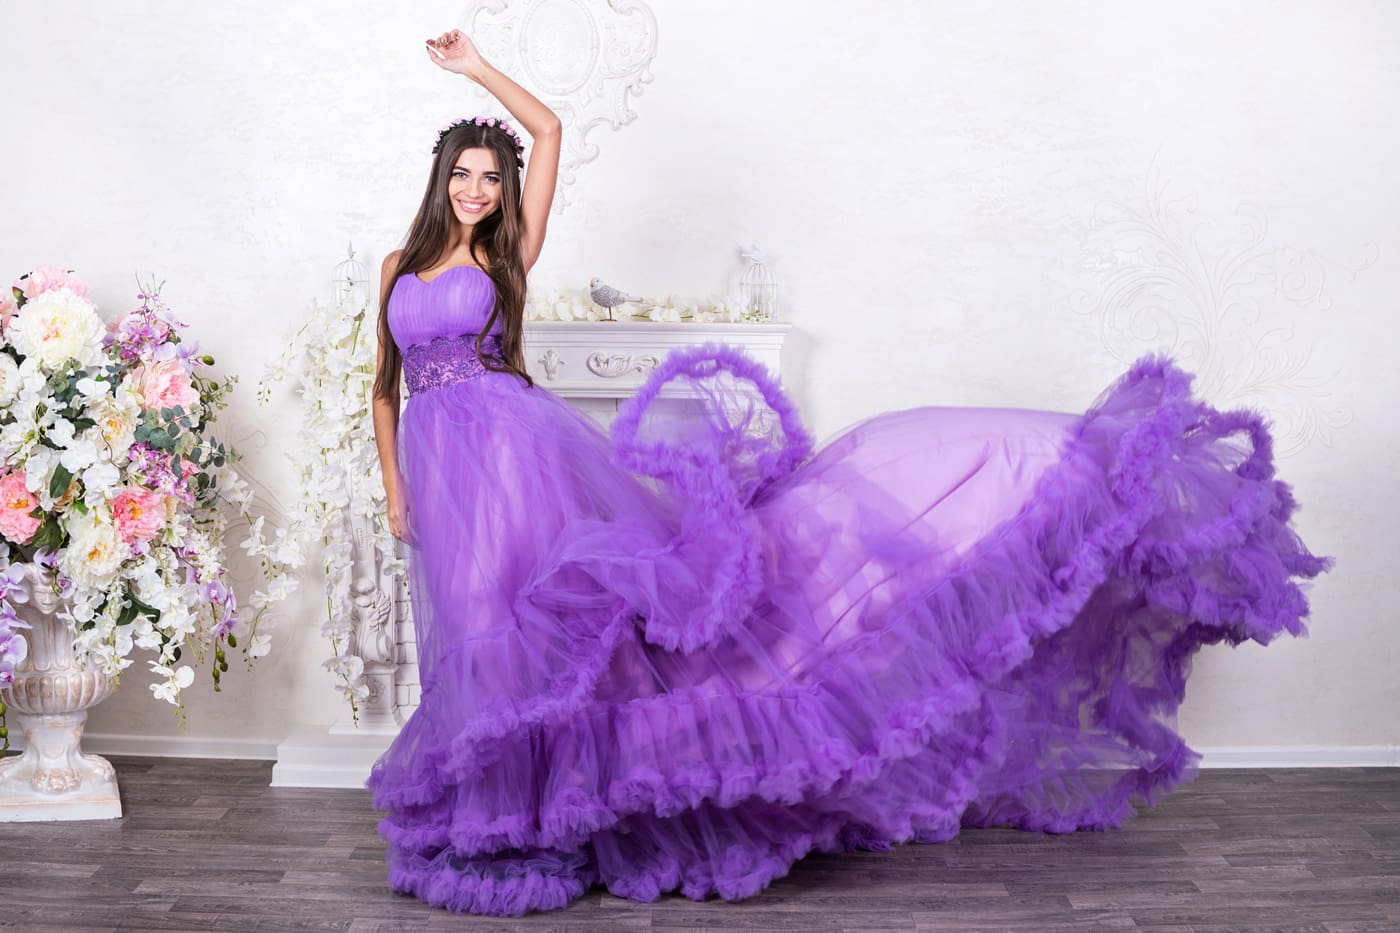 QuinceaÃ±eras in Yazoo City Mississippi